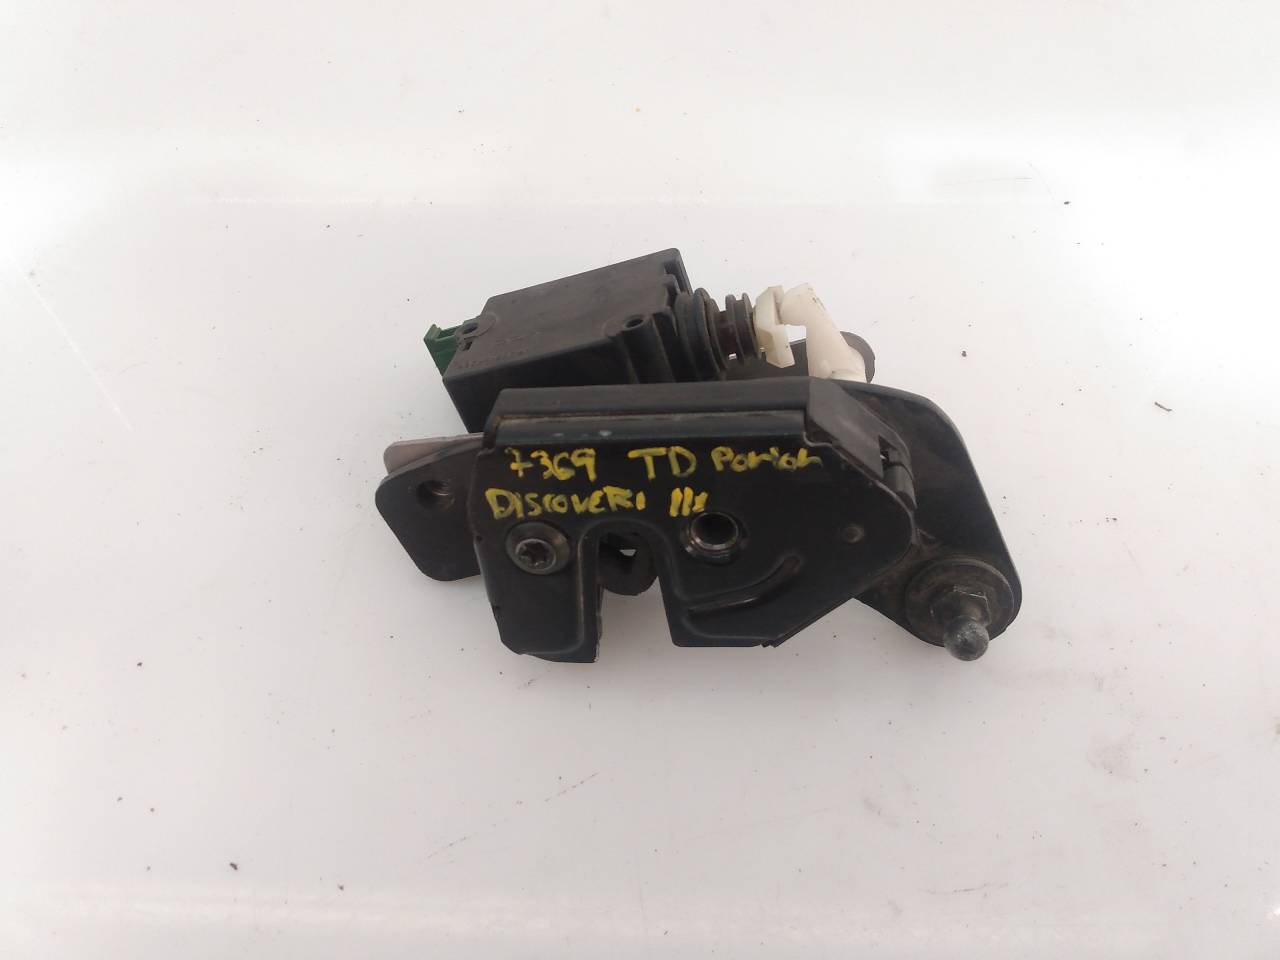 LAND ROVER Discovery 4 generation (2009-2016) Tailgate Boot Lock 51247016050, E1-B4-36-2 18648331